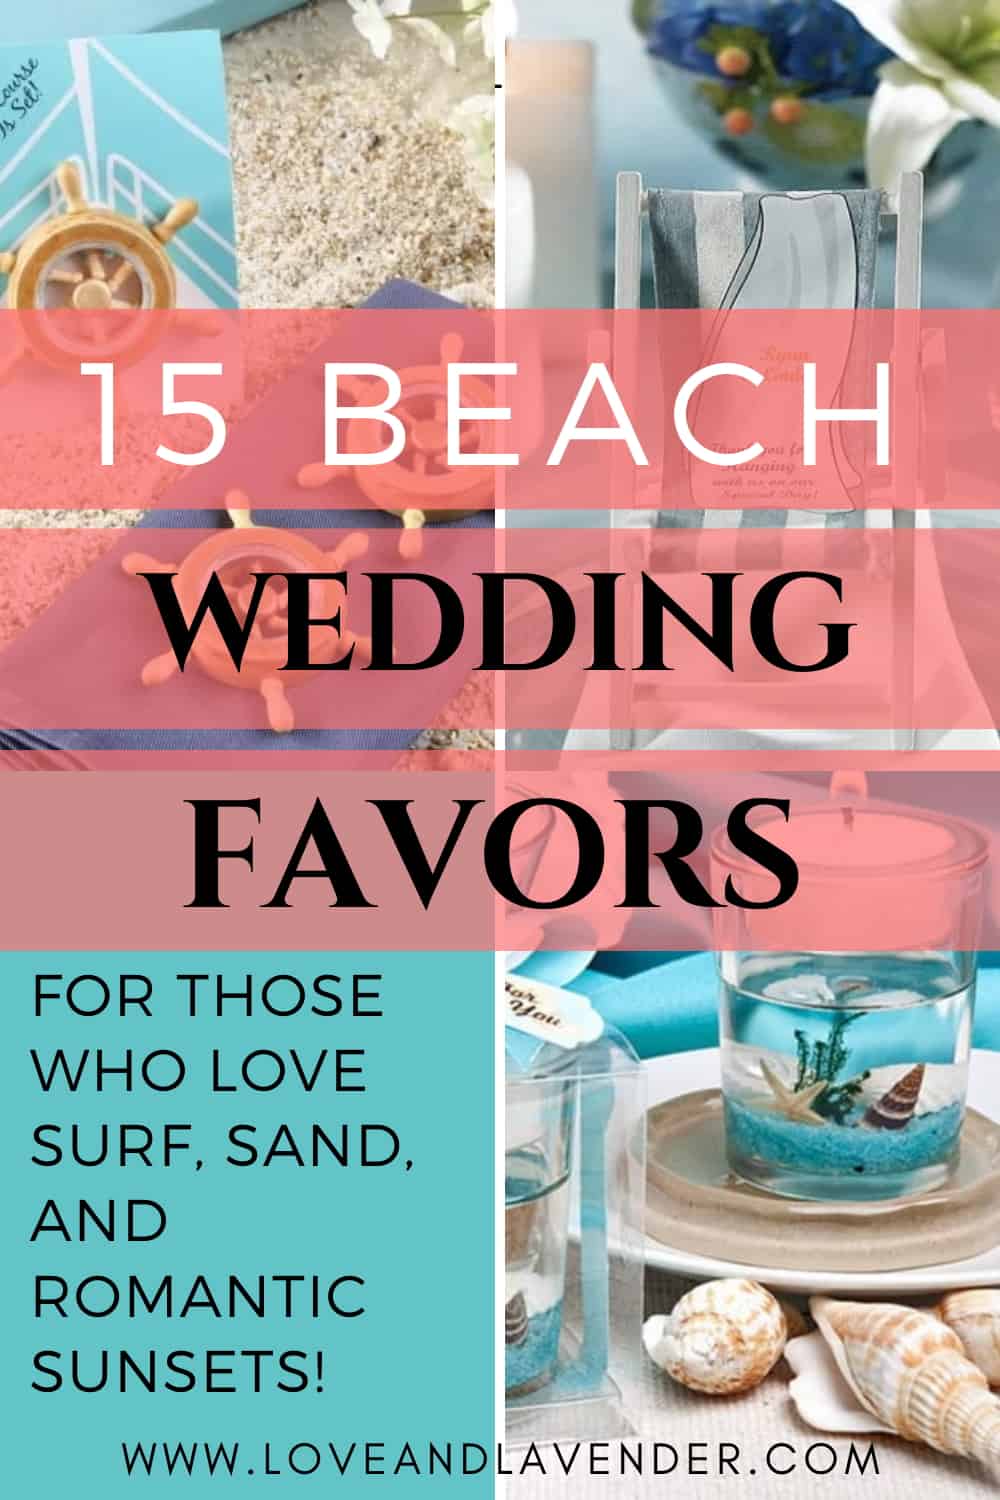 15 Beach Wedding Favors for Those who Love Surf, Sand, and Romantic Sunsets!